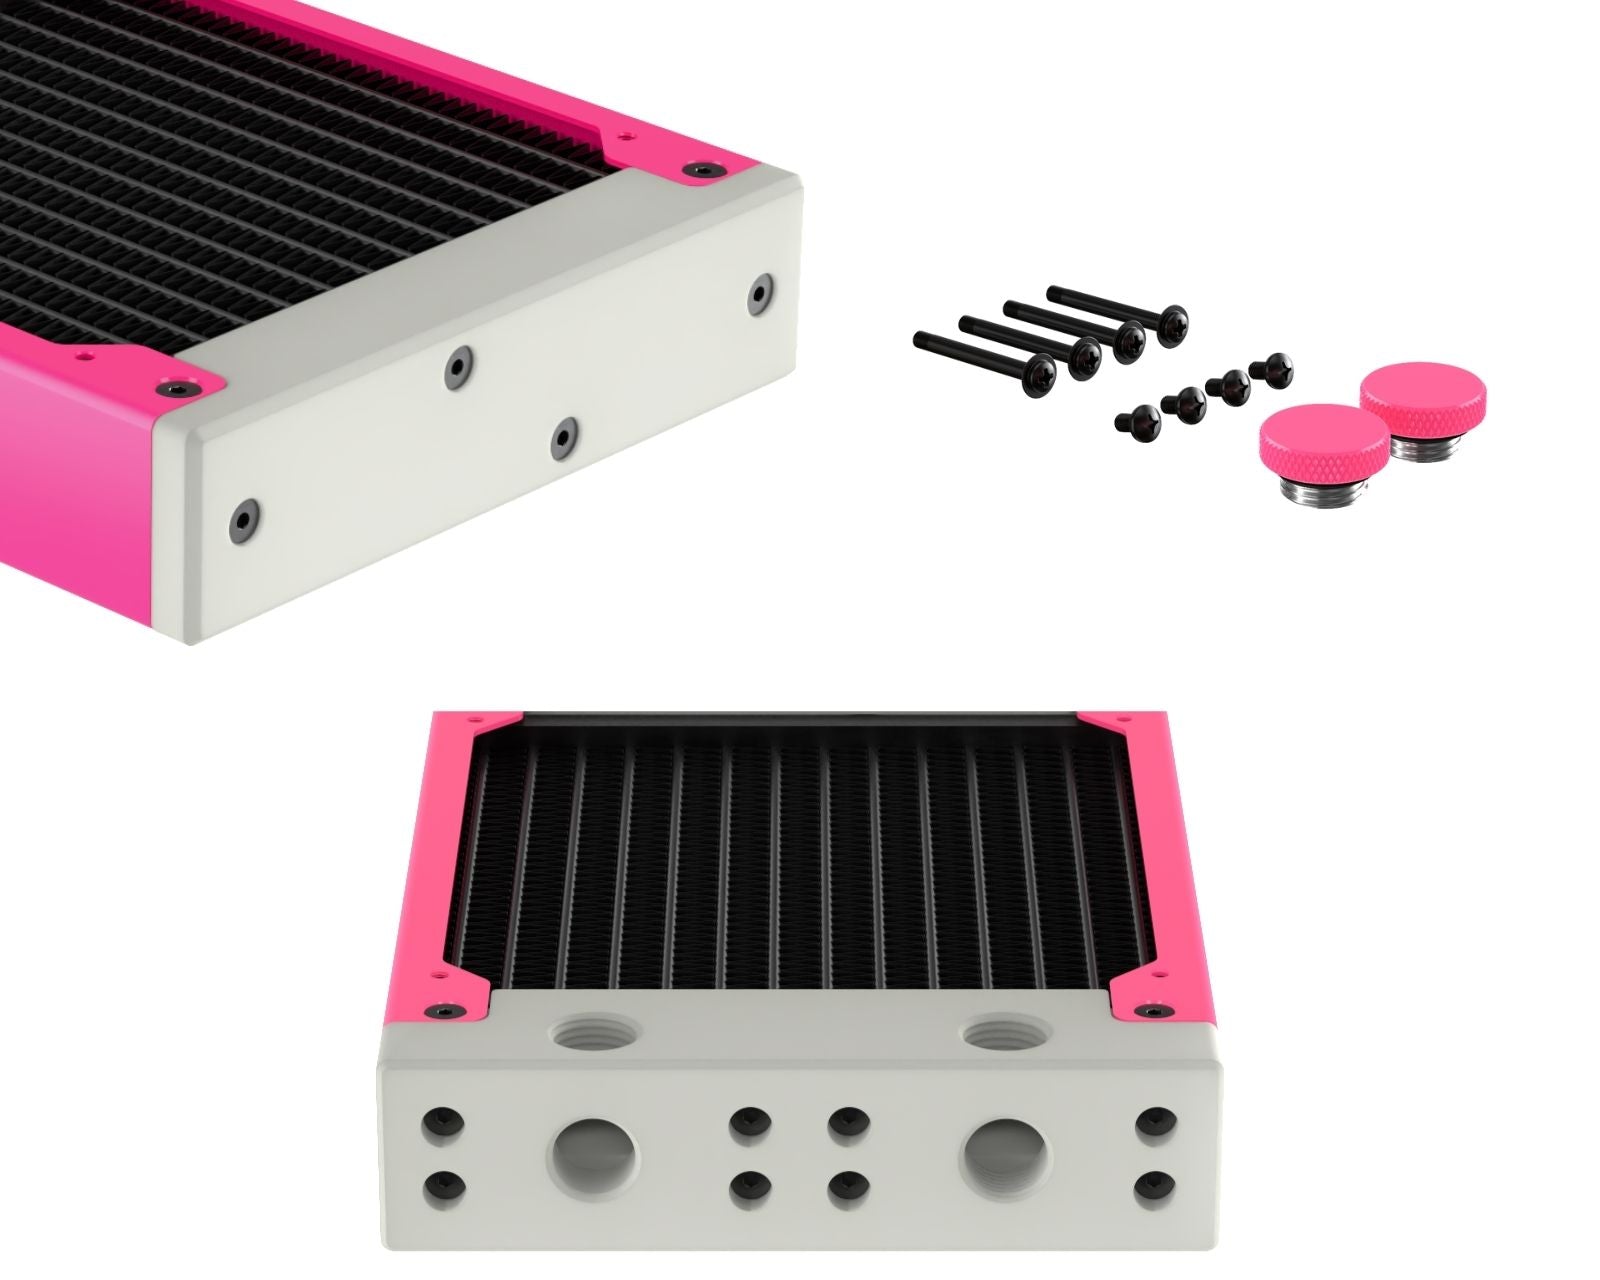 PrimoChill 120SL (30mm) EXIMO Modular Radiator, White POM, 1x120mm, Single Fan (R-SL-W12) Available in 20+ Colors, Assembled in USA and Custom Watercooling Loop Ready - UV Pink